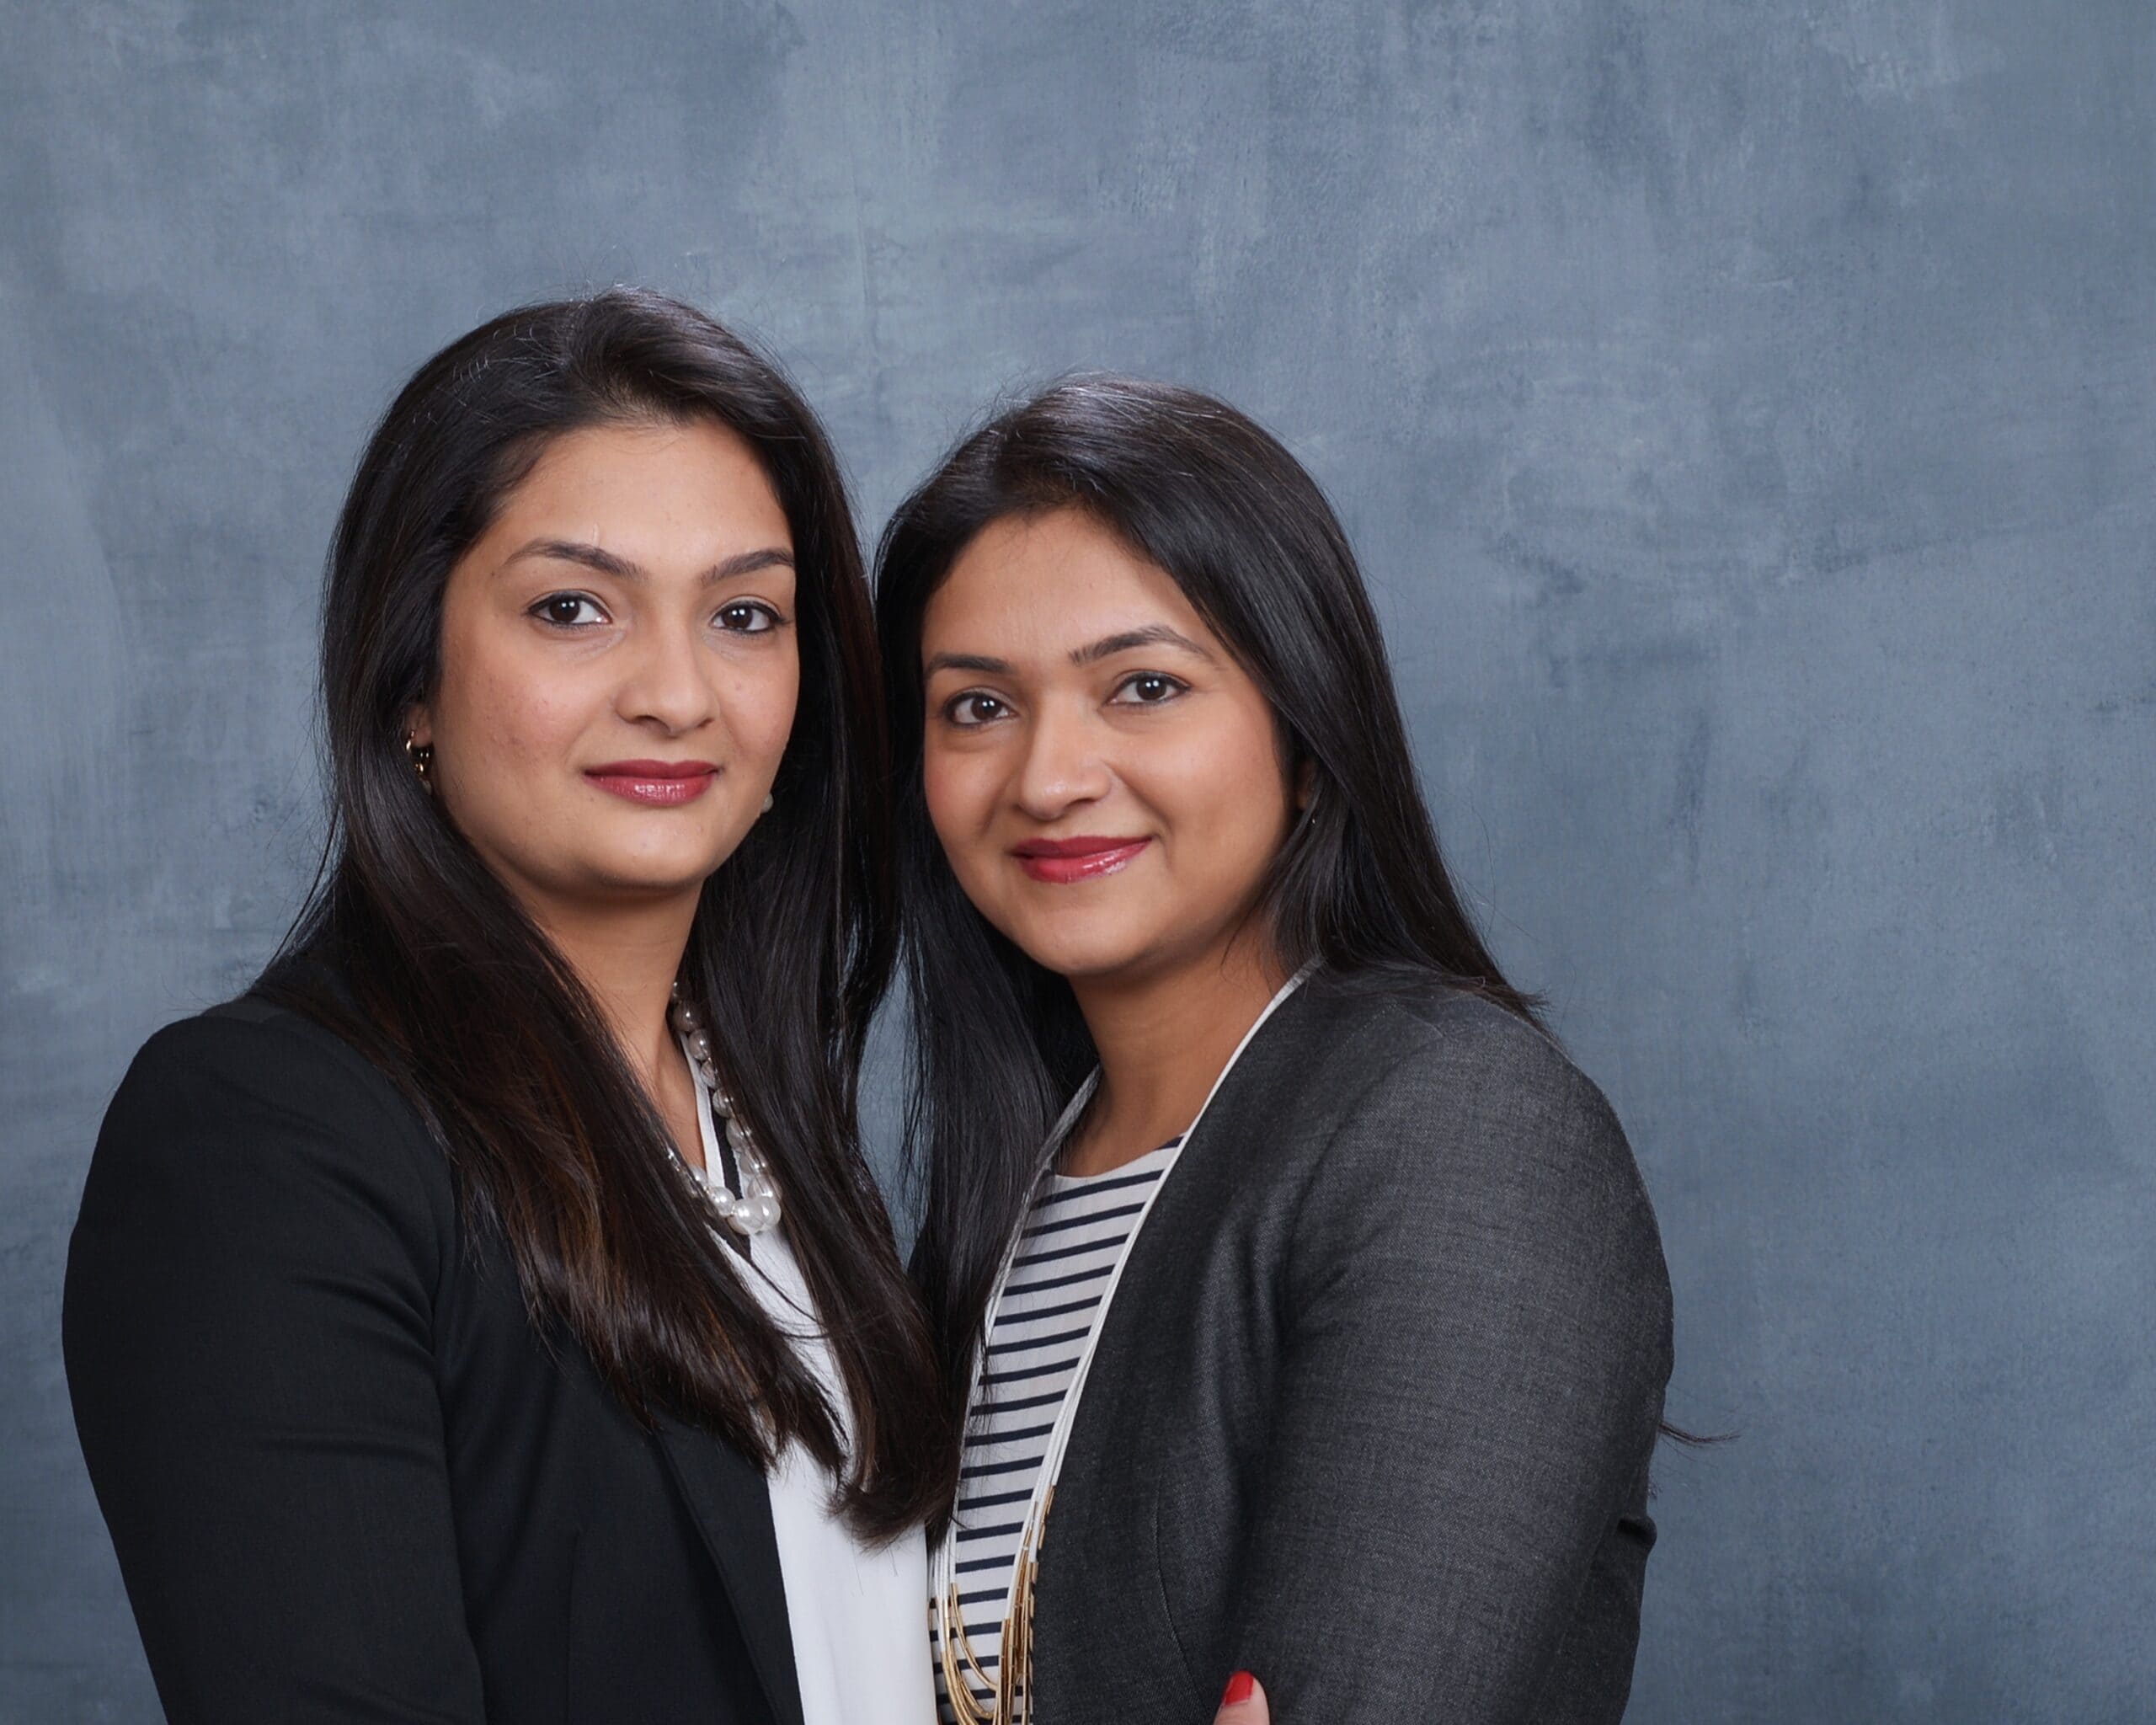 Photo of two sisters in professional attire